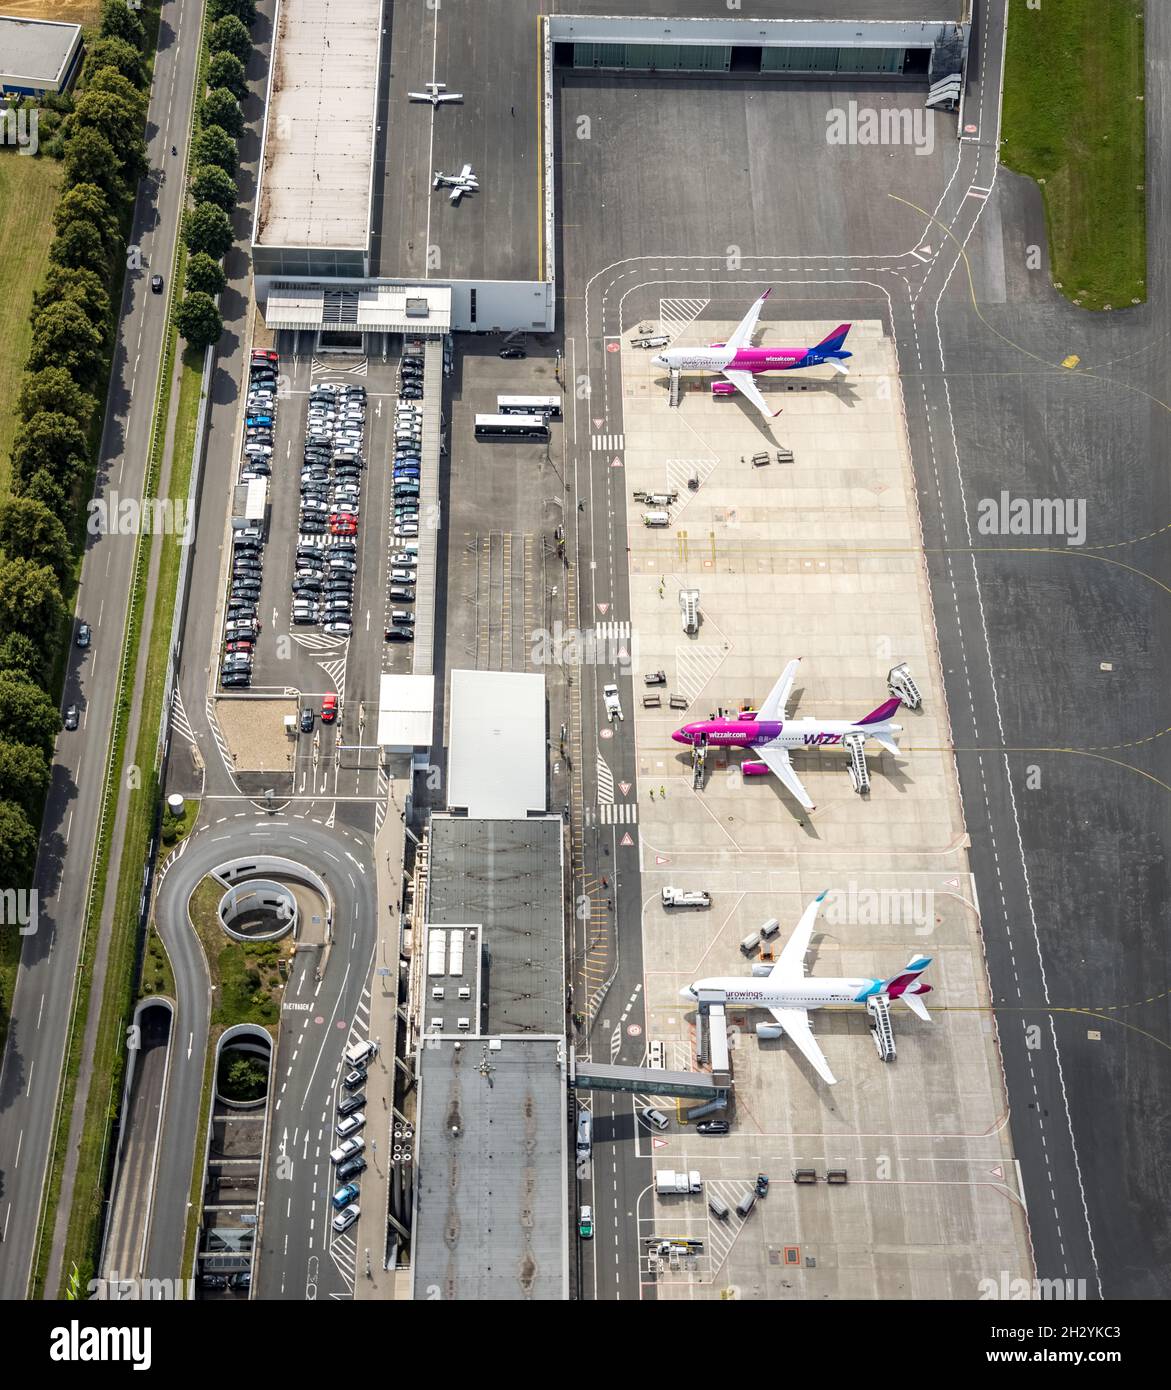 Aerial view, Dortmund Airport, EDLW, Wickede, apron with two jets of Wizzair and one Eurowings plane, Dortmund, Ruhr Area, North Rhine-Westphalia, Ger Stock Photo